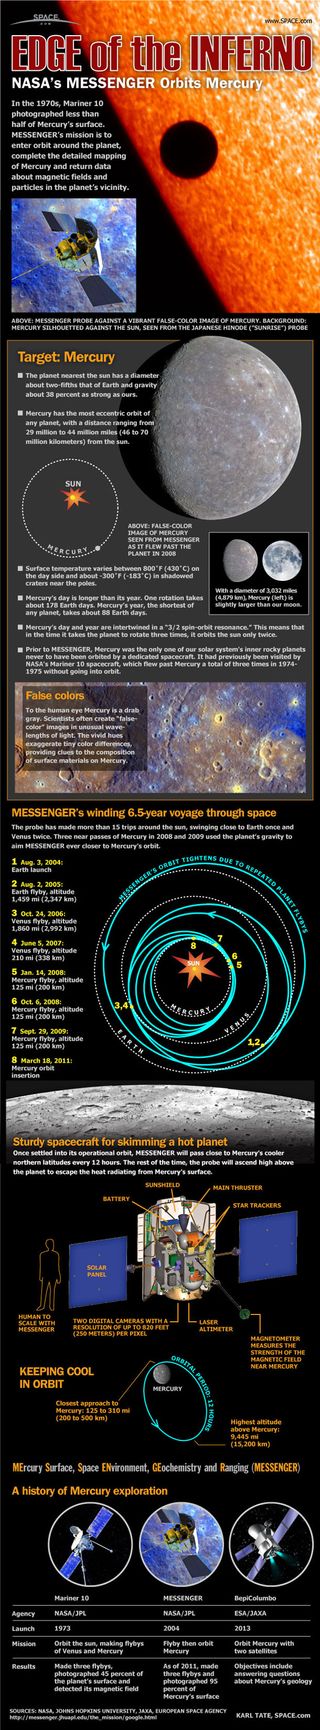 NASA's MESSENGER spacecraft is the first ever to orbit the planet Mercury. See how the MESSENGER mission to Mercury works in this Space.com infographic.